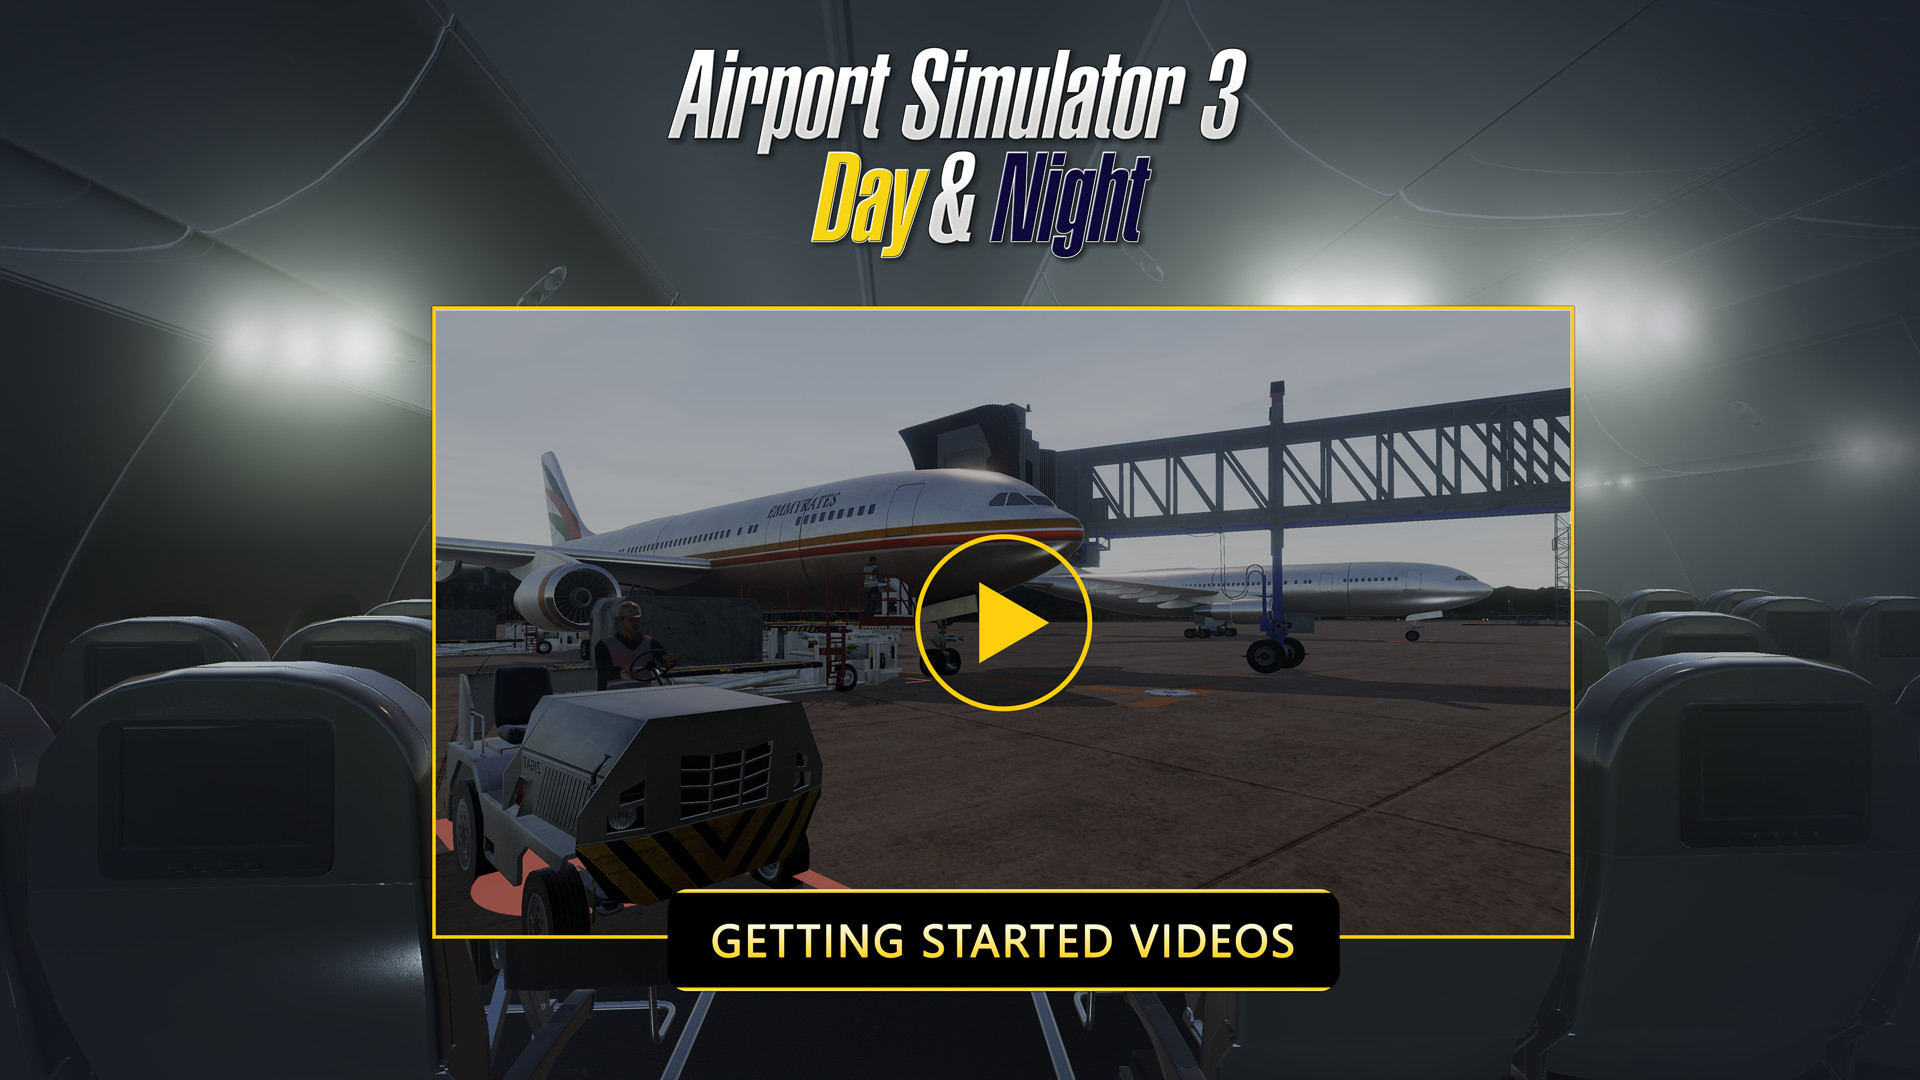 Airport Simulator 3: Day & Night - Digital Deluxe Content Featured Screenshot #1